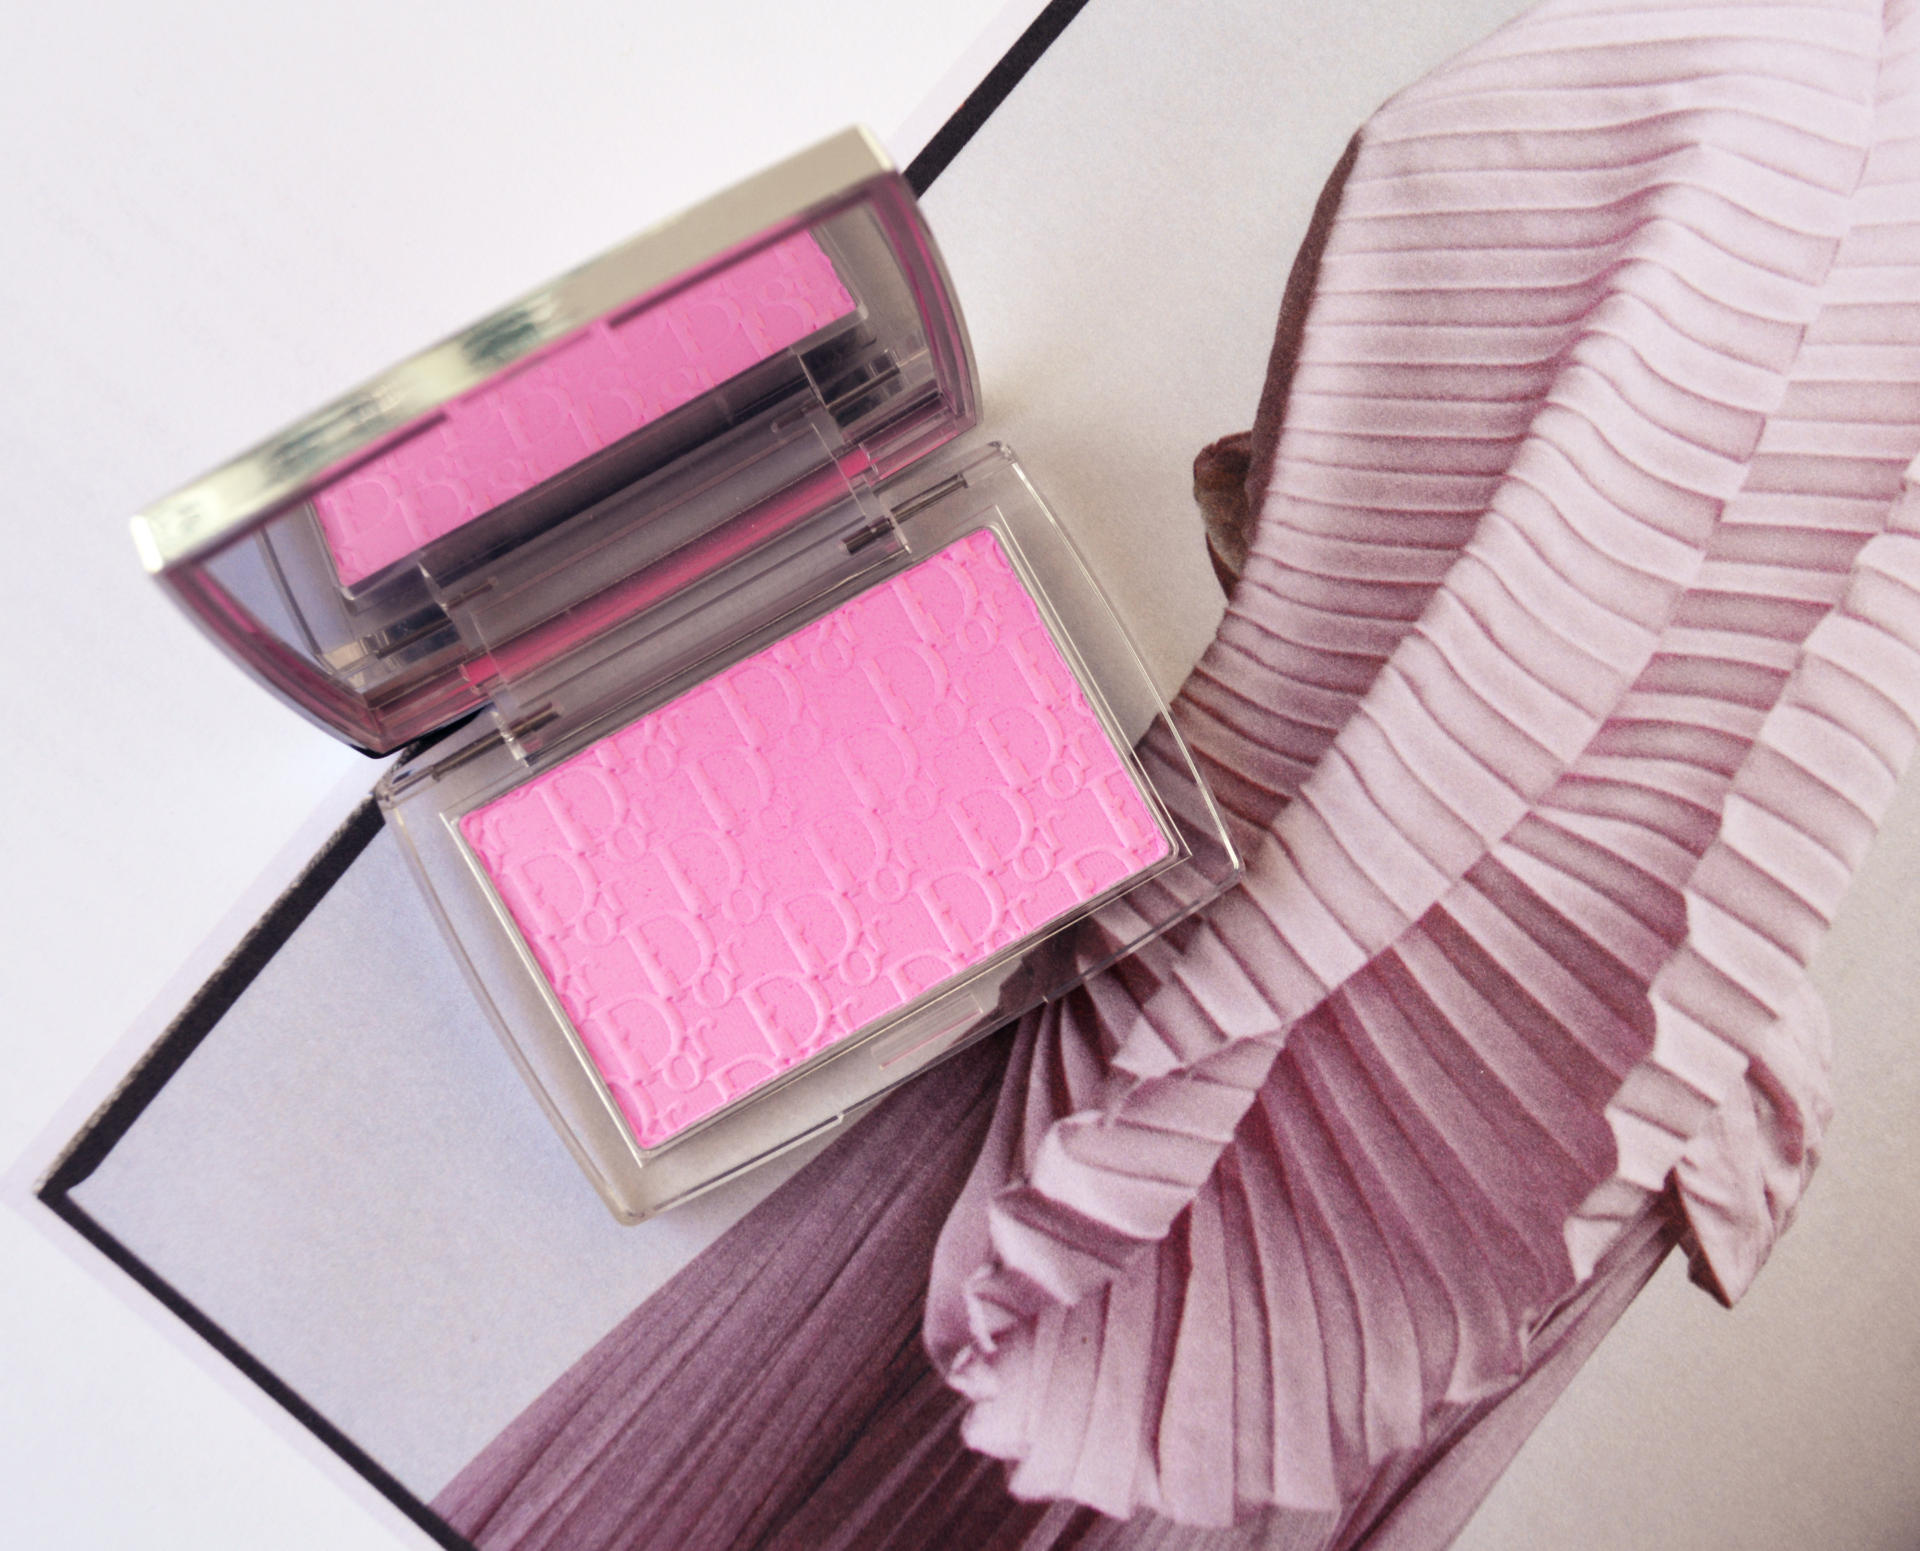 Dior Backstage Rosy Glow Blush in Pink